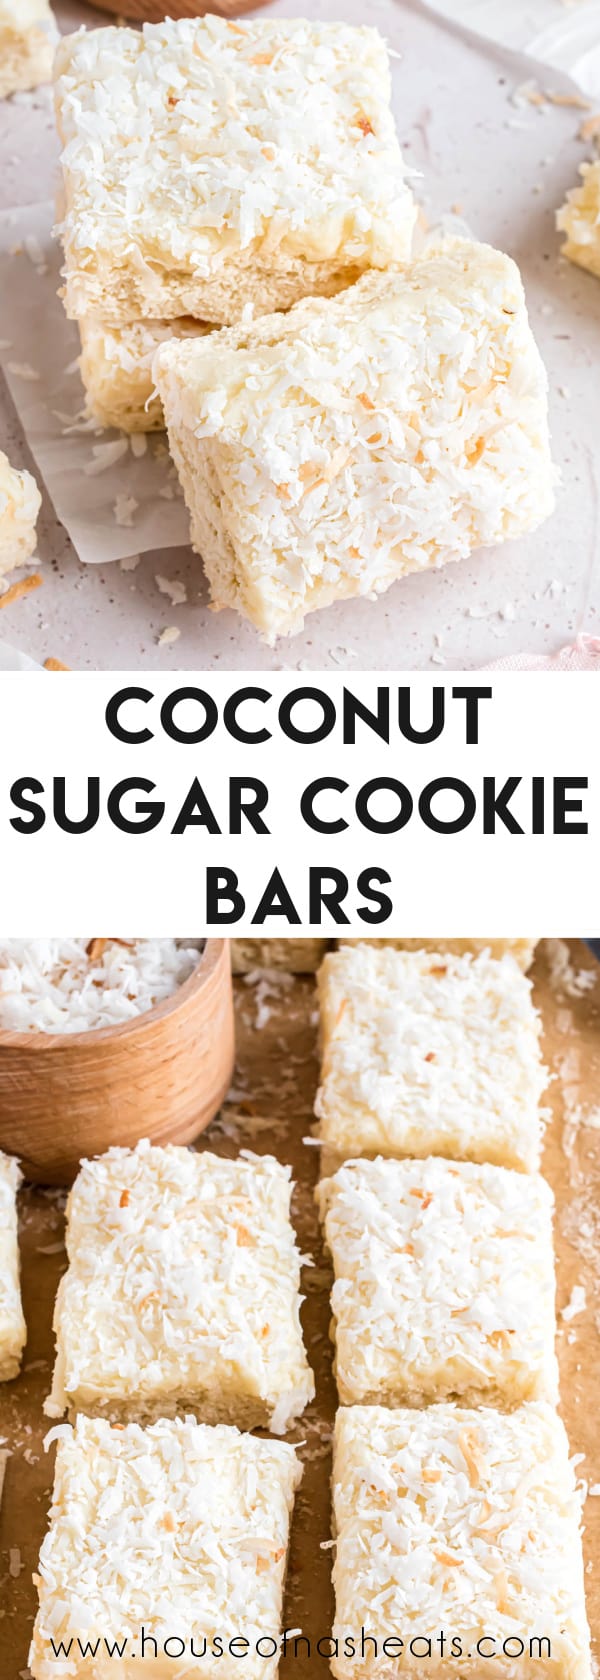 A collage of images of coconut sugar cookie bars with text overlay.